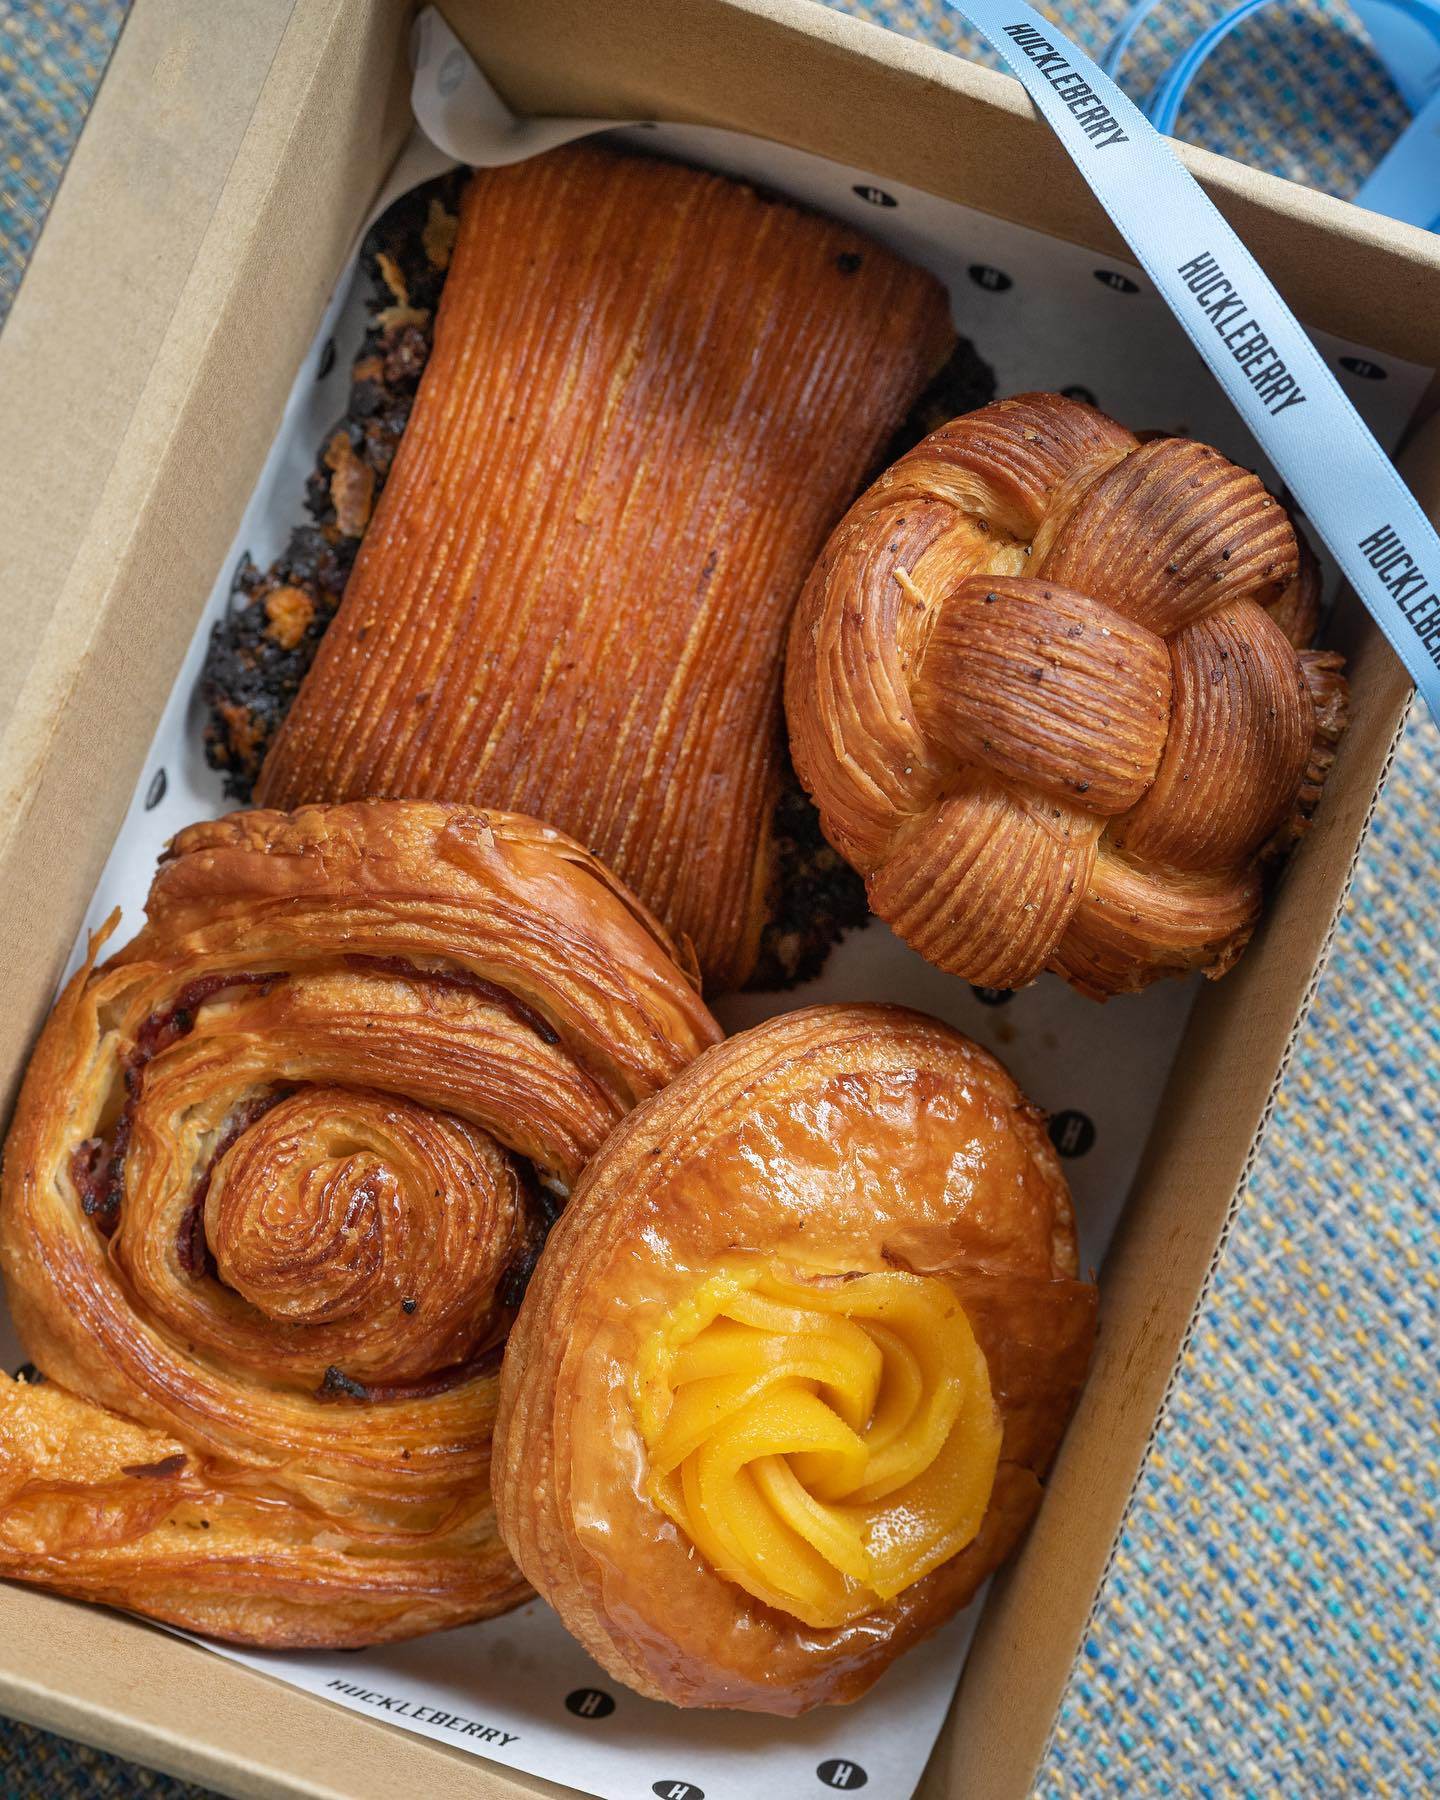 Bakeries in KL and PJ - Huckleberry